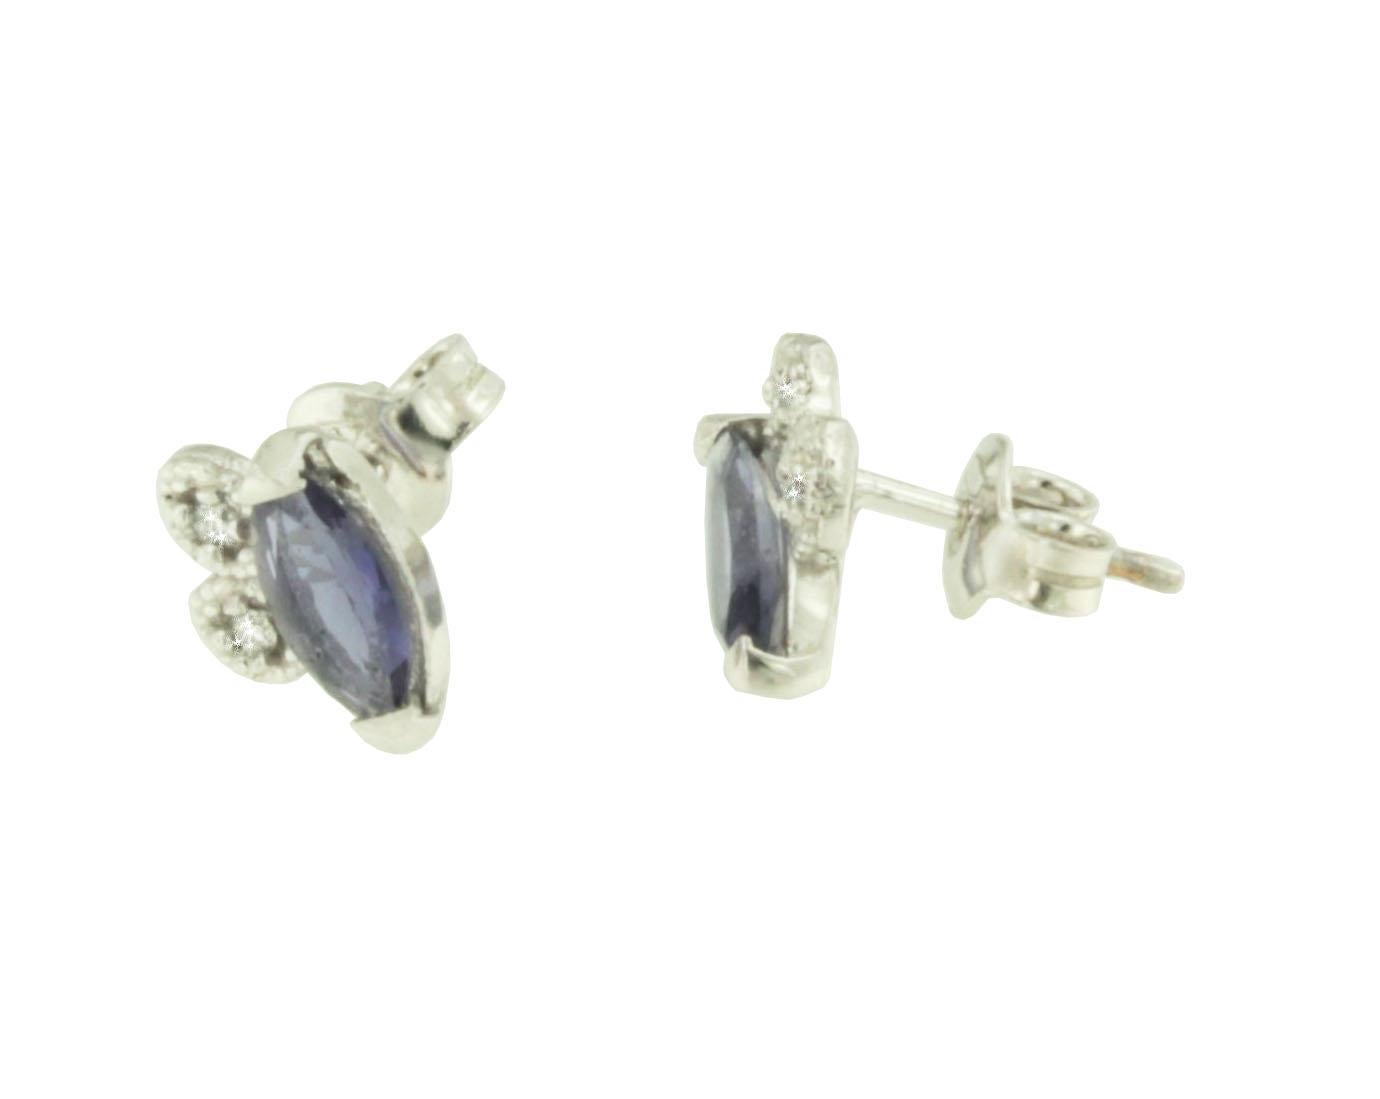 Modern, elegant earrings in white gold 18kt . Iolite stones with an intense and bright blue color, they can be worn for any occasion or for special days. Hande made in Italy by Stanoppi Jewellery since 1948. White diamonds cts 0.04


All Stanoppi